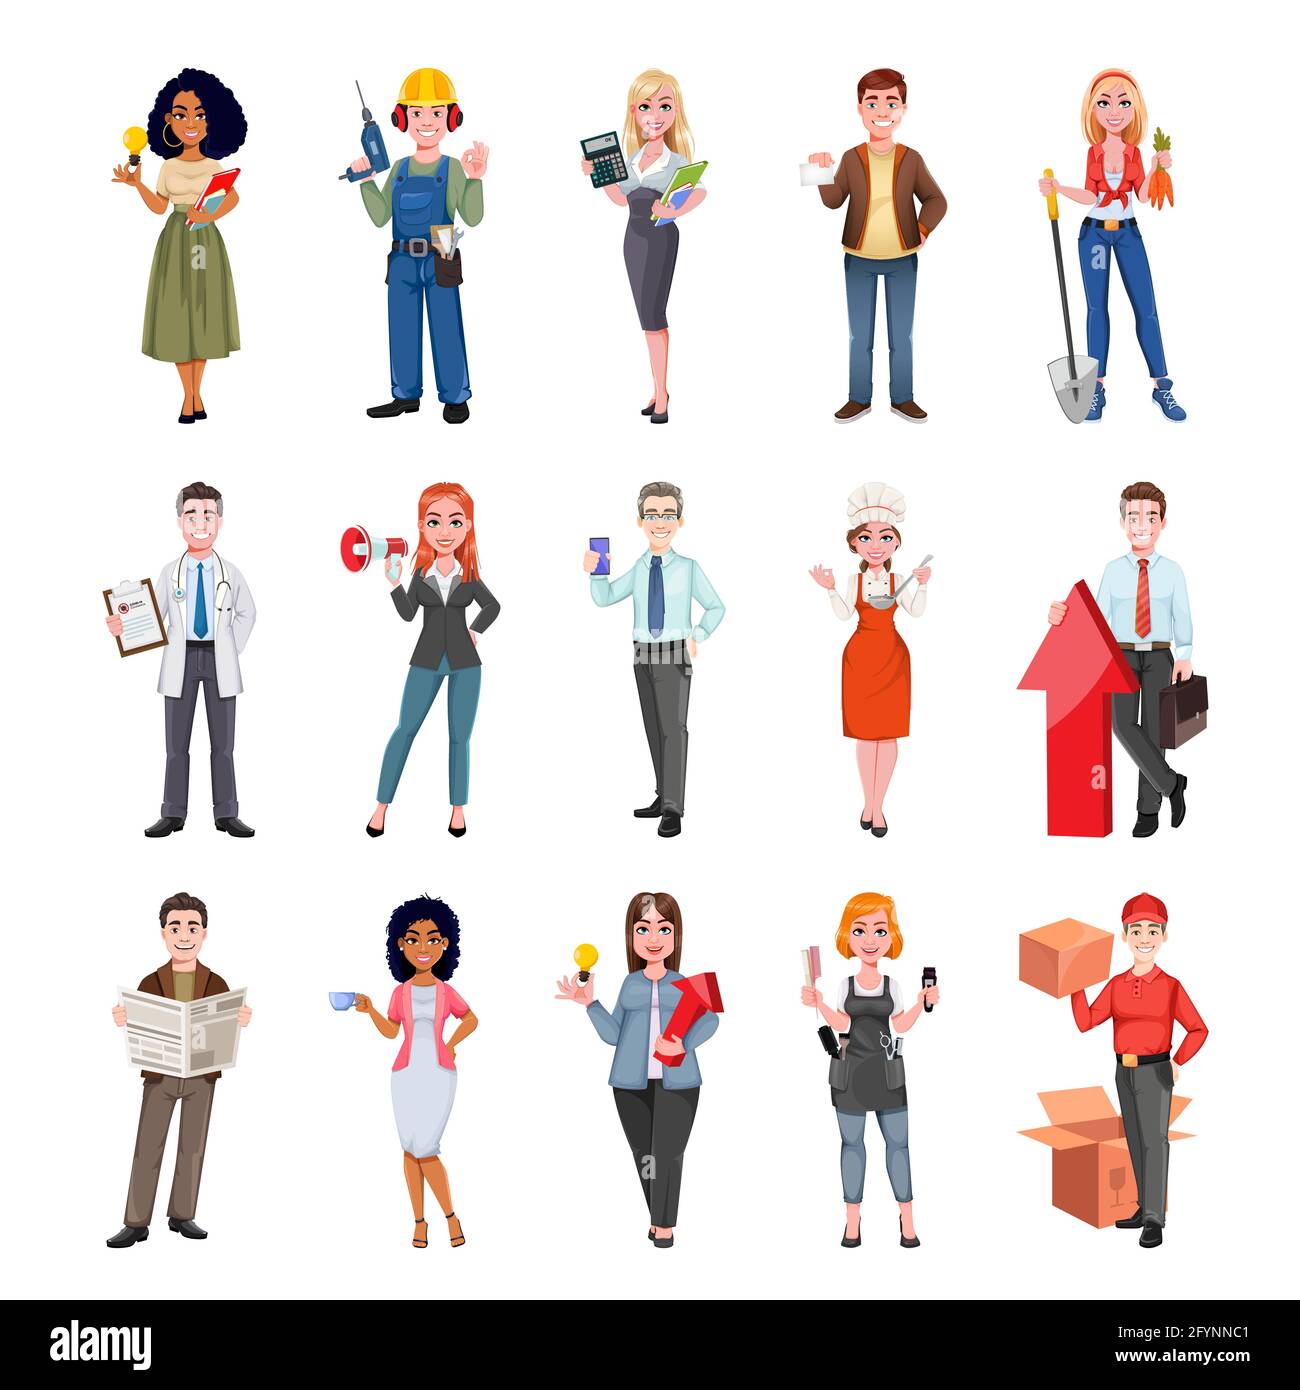 People of different professions. Various occupations. Cheerful cartoon characters. Stock vector illustration Stock Vector